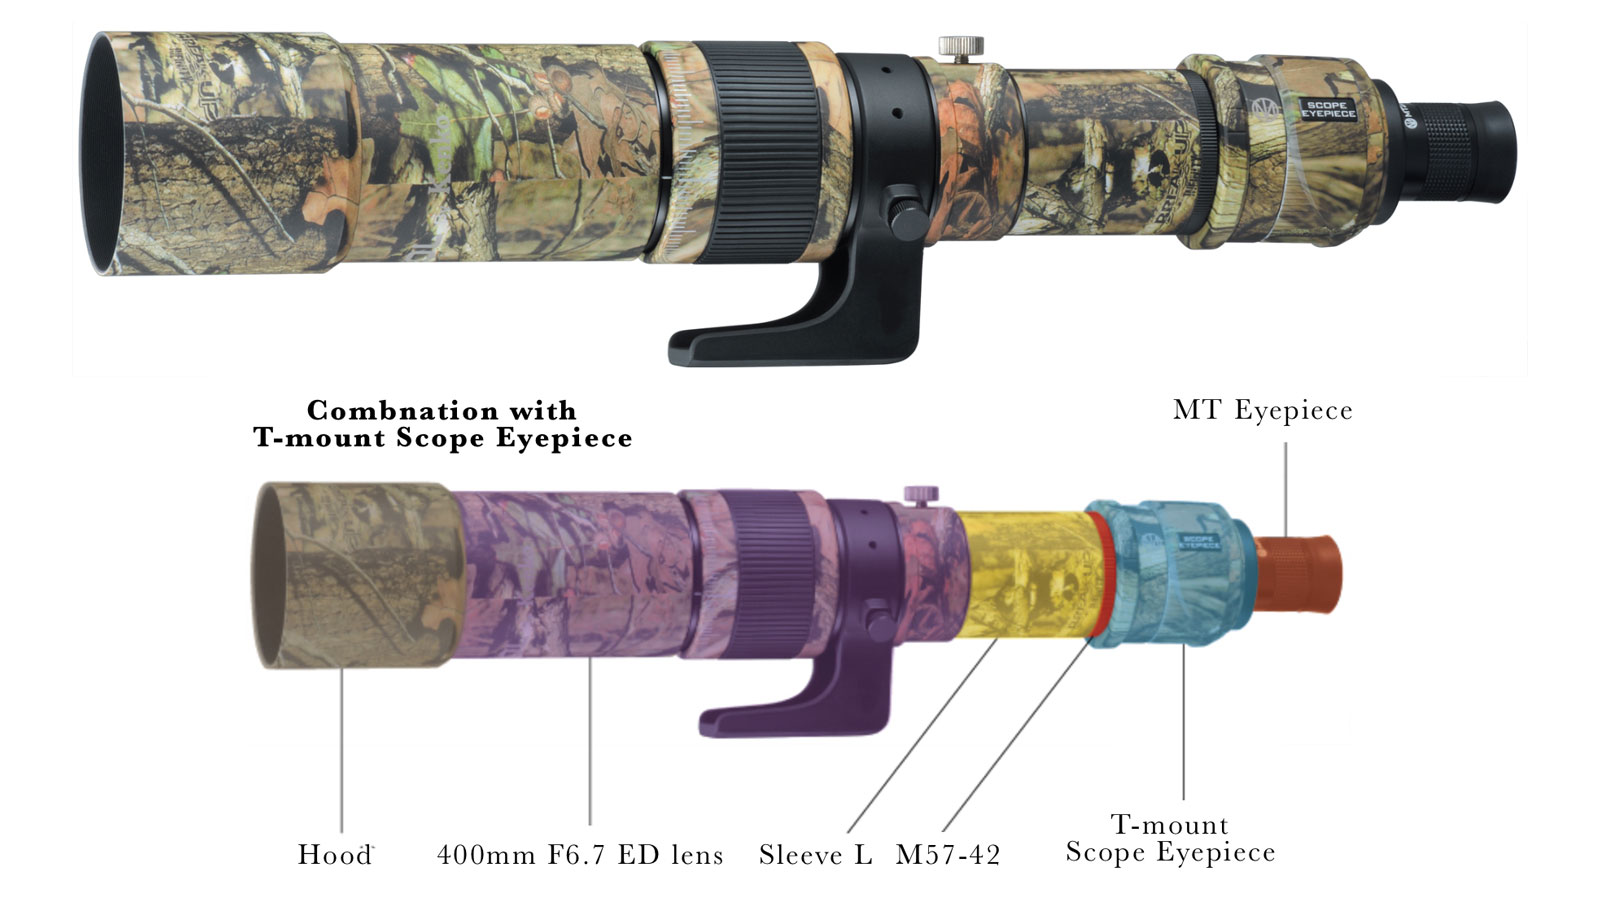 Kenko MILTOL 400mm F6.7 ED Camouflage "Mossy Oak" lens as a kit for on-ground observation